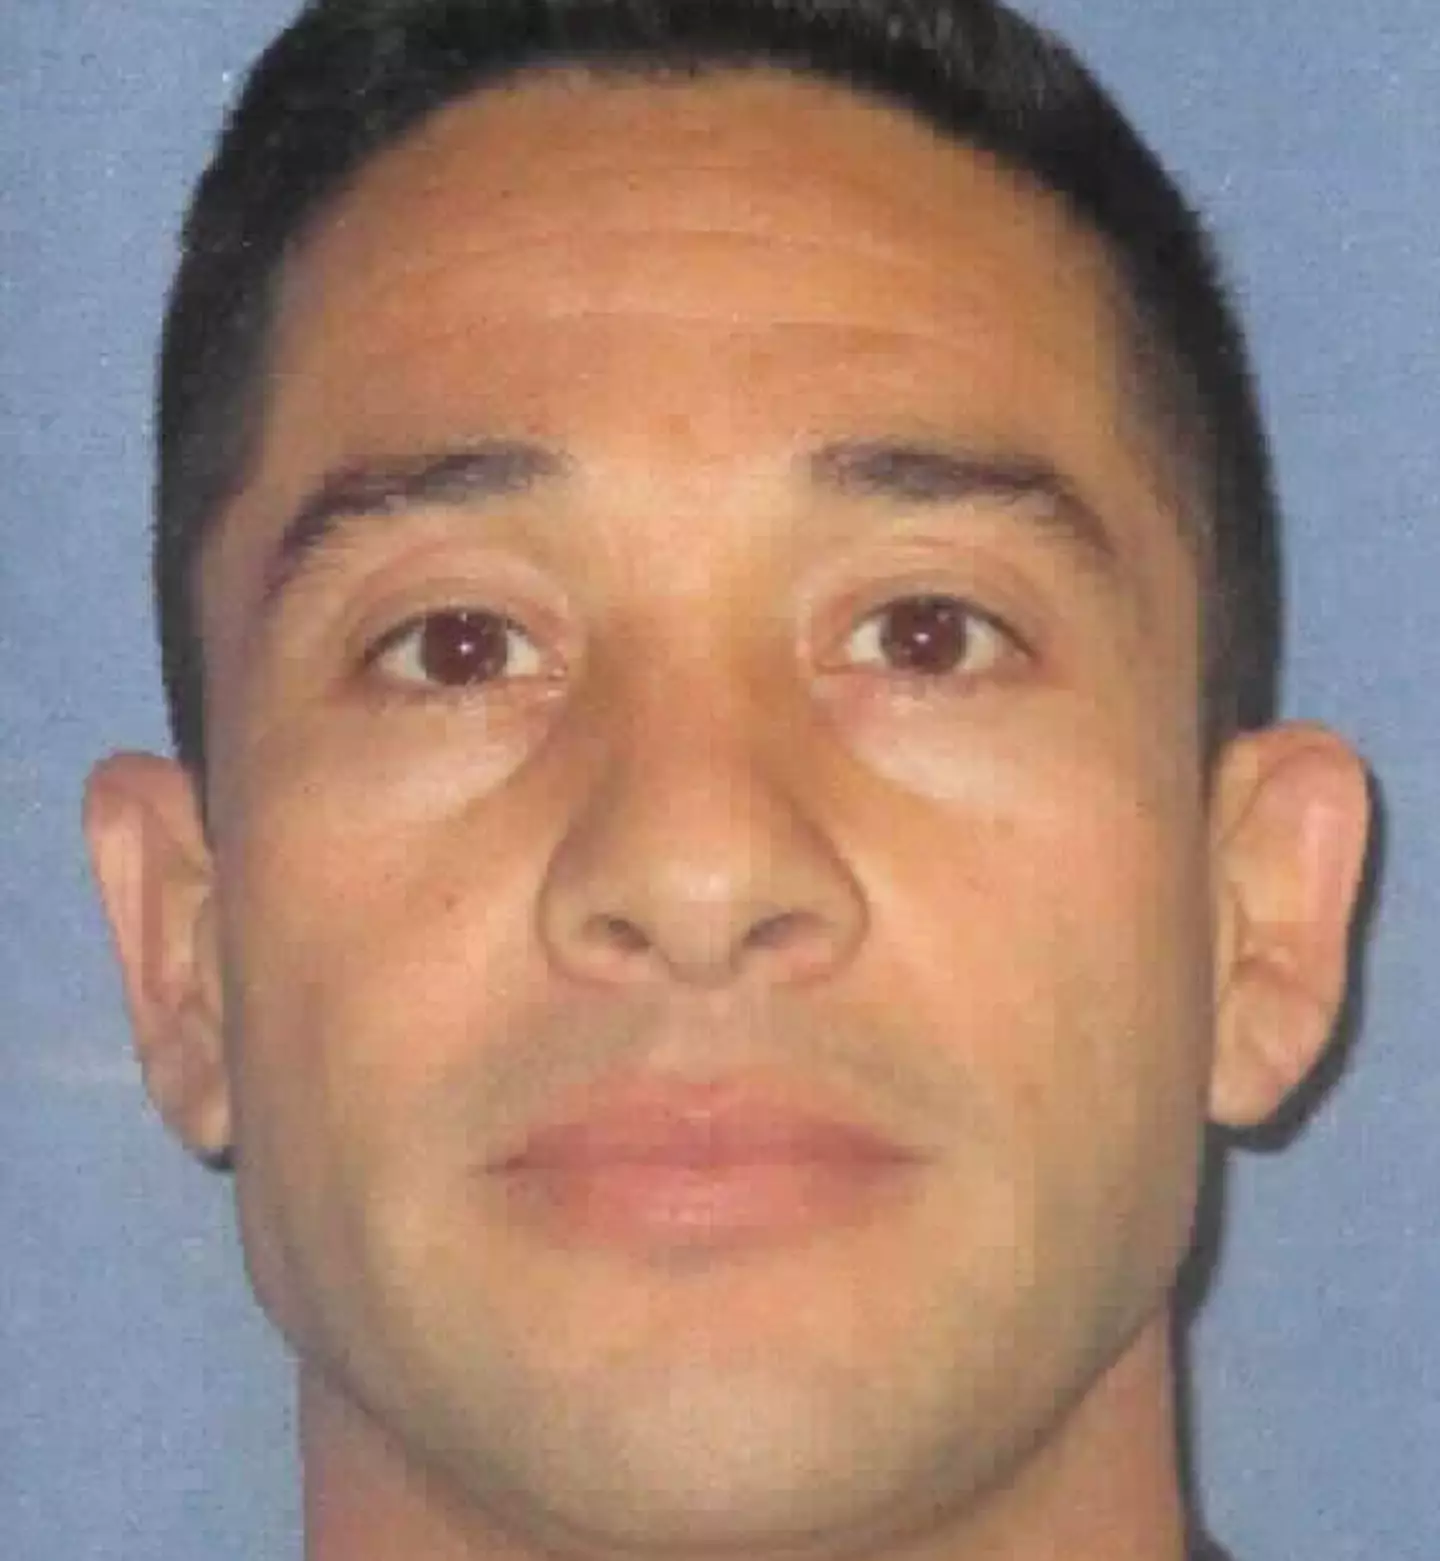 Duarte-Herrera was found to be missing during a head count.